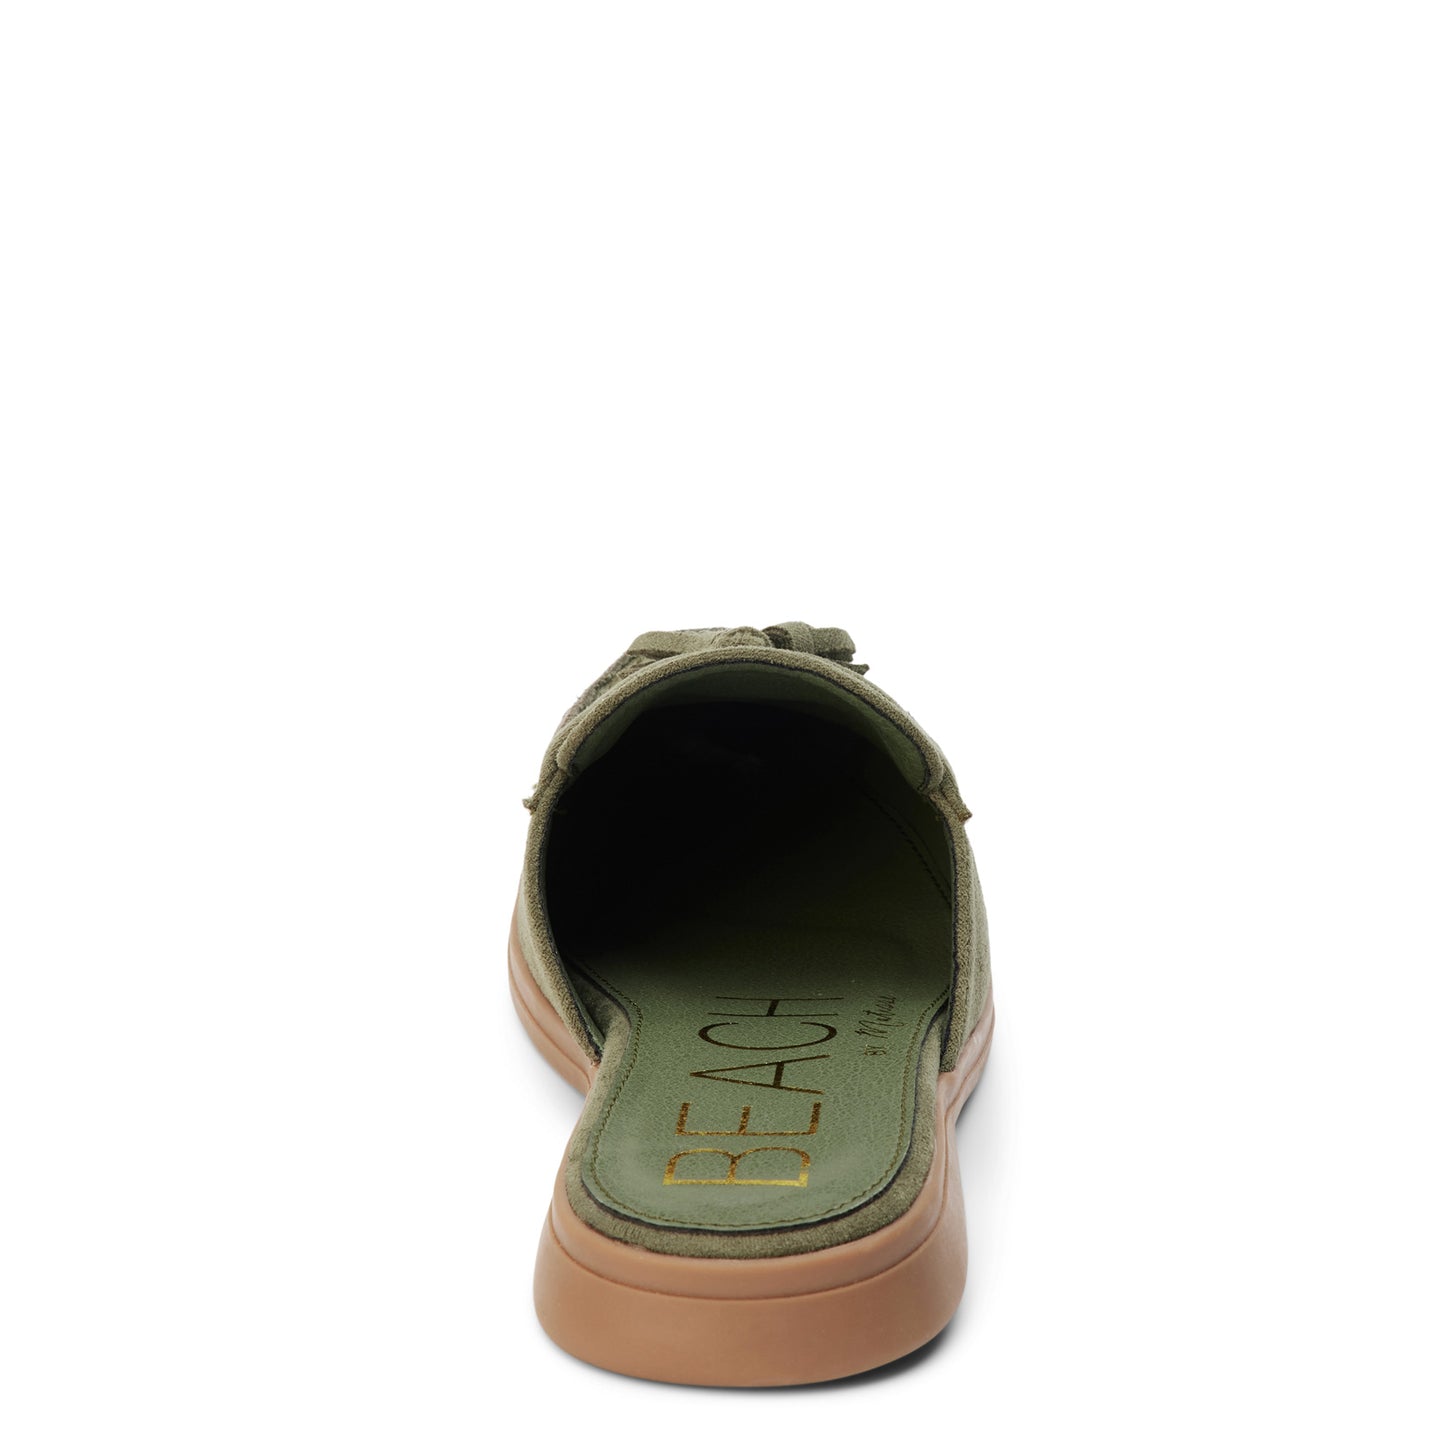 Peltz Shoes  Women's Matisse Tyra Mule OLIVE TYRA OLIVE